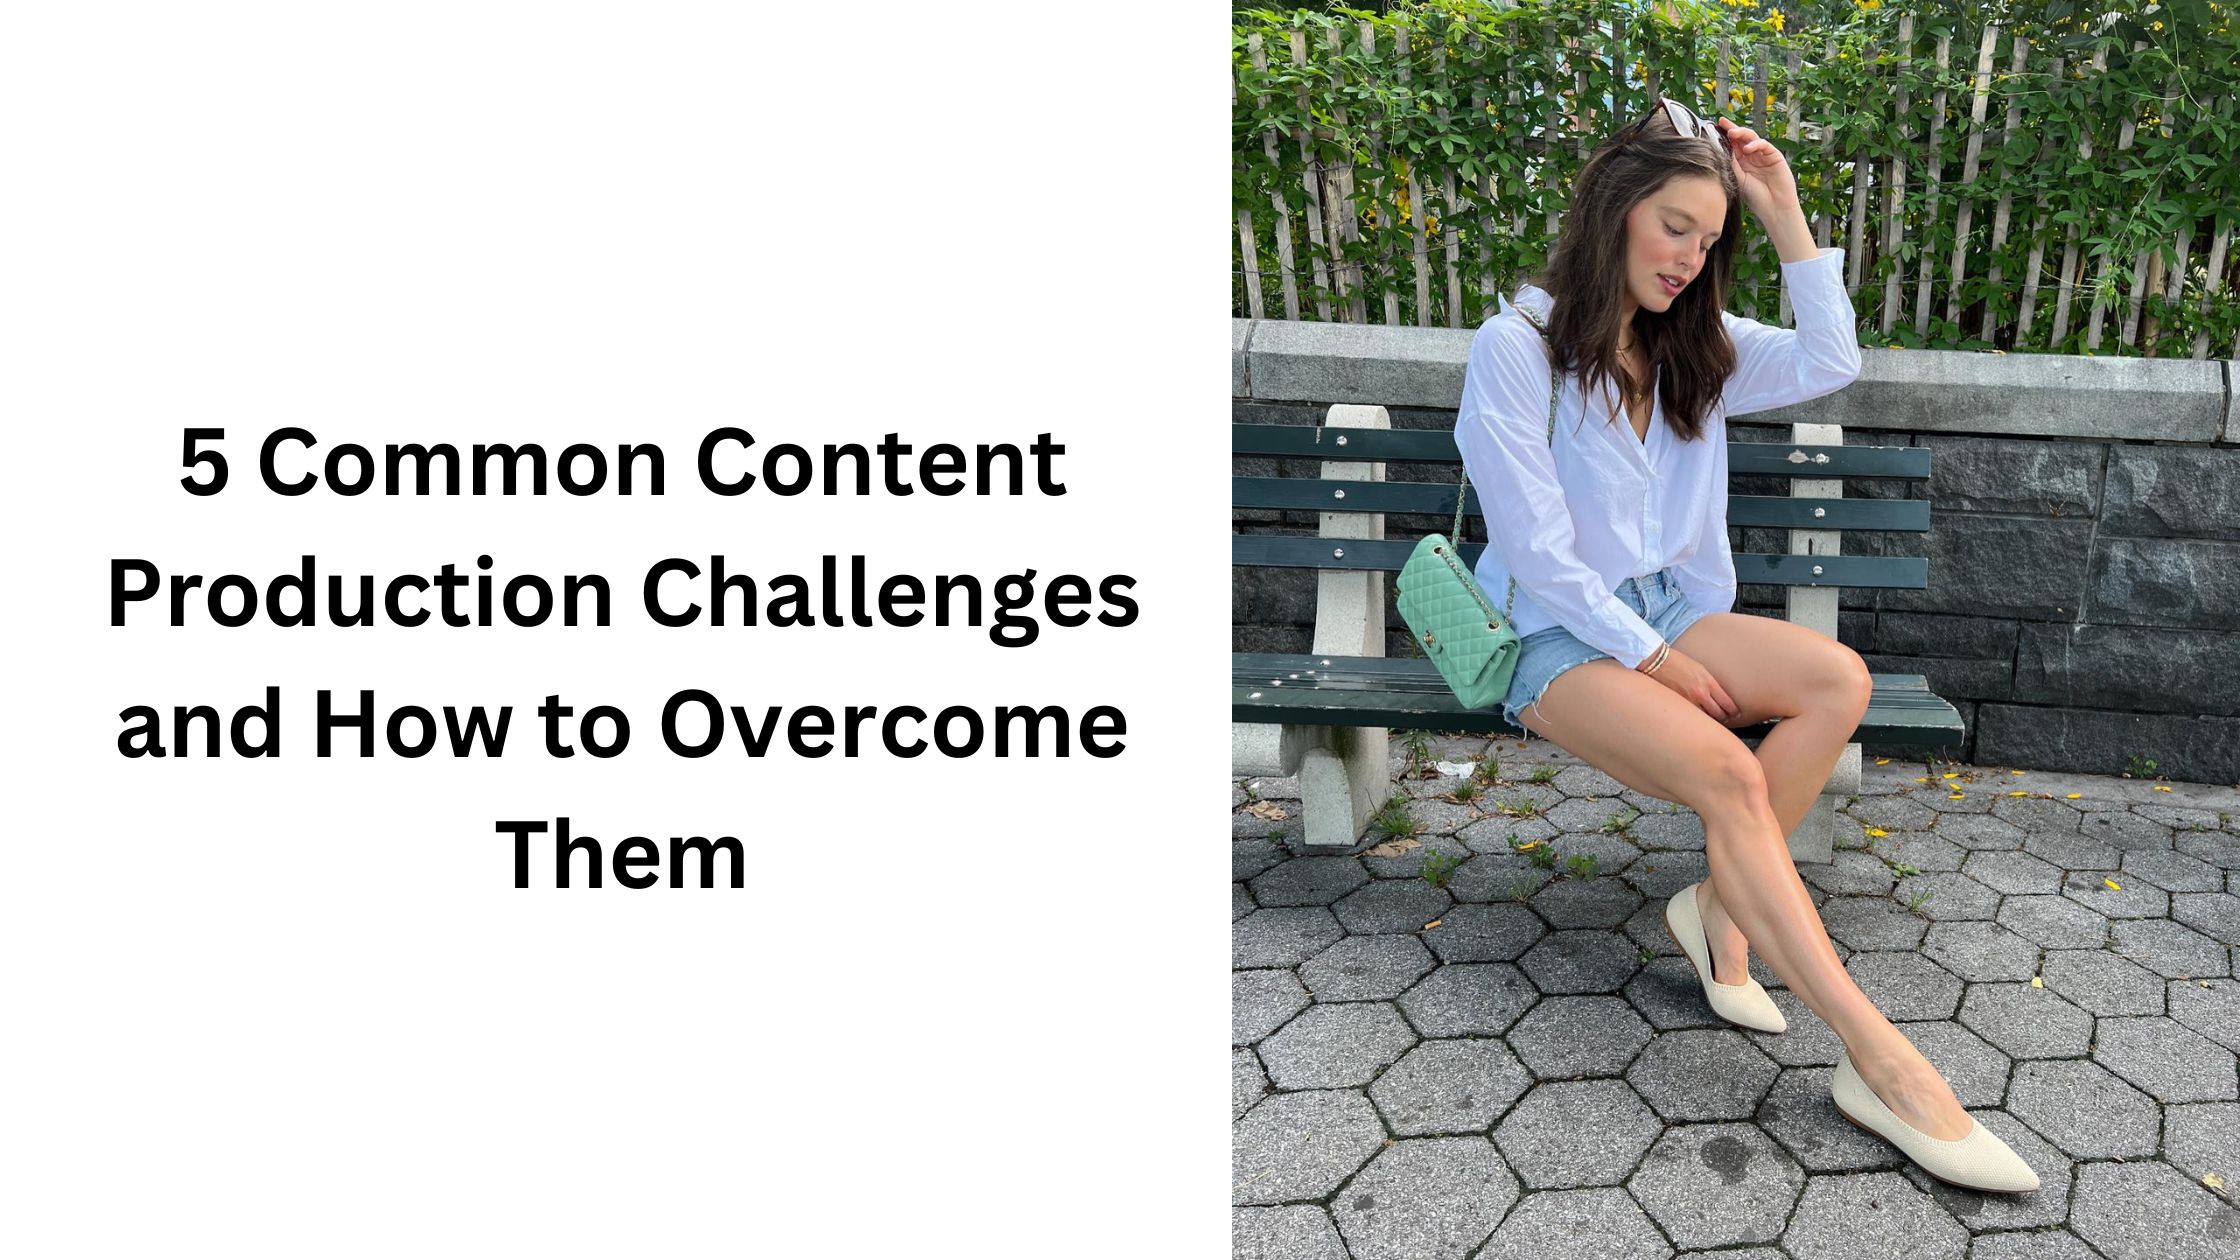 5 Common Content Production Challenges and How to Overcome Them